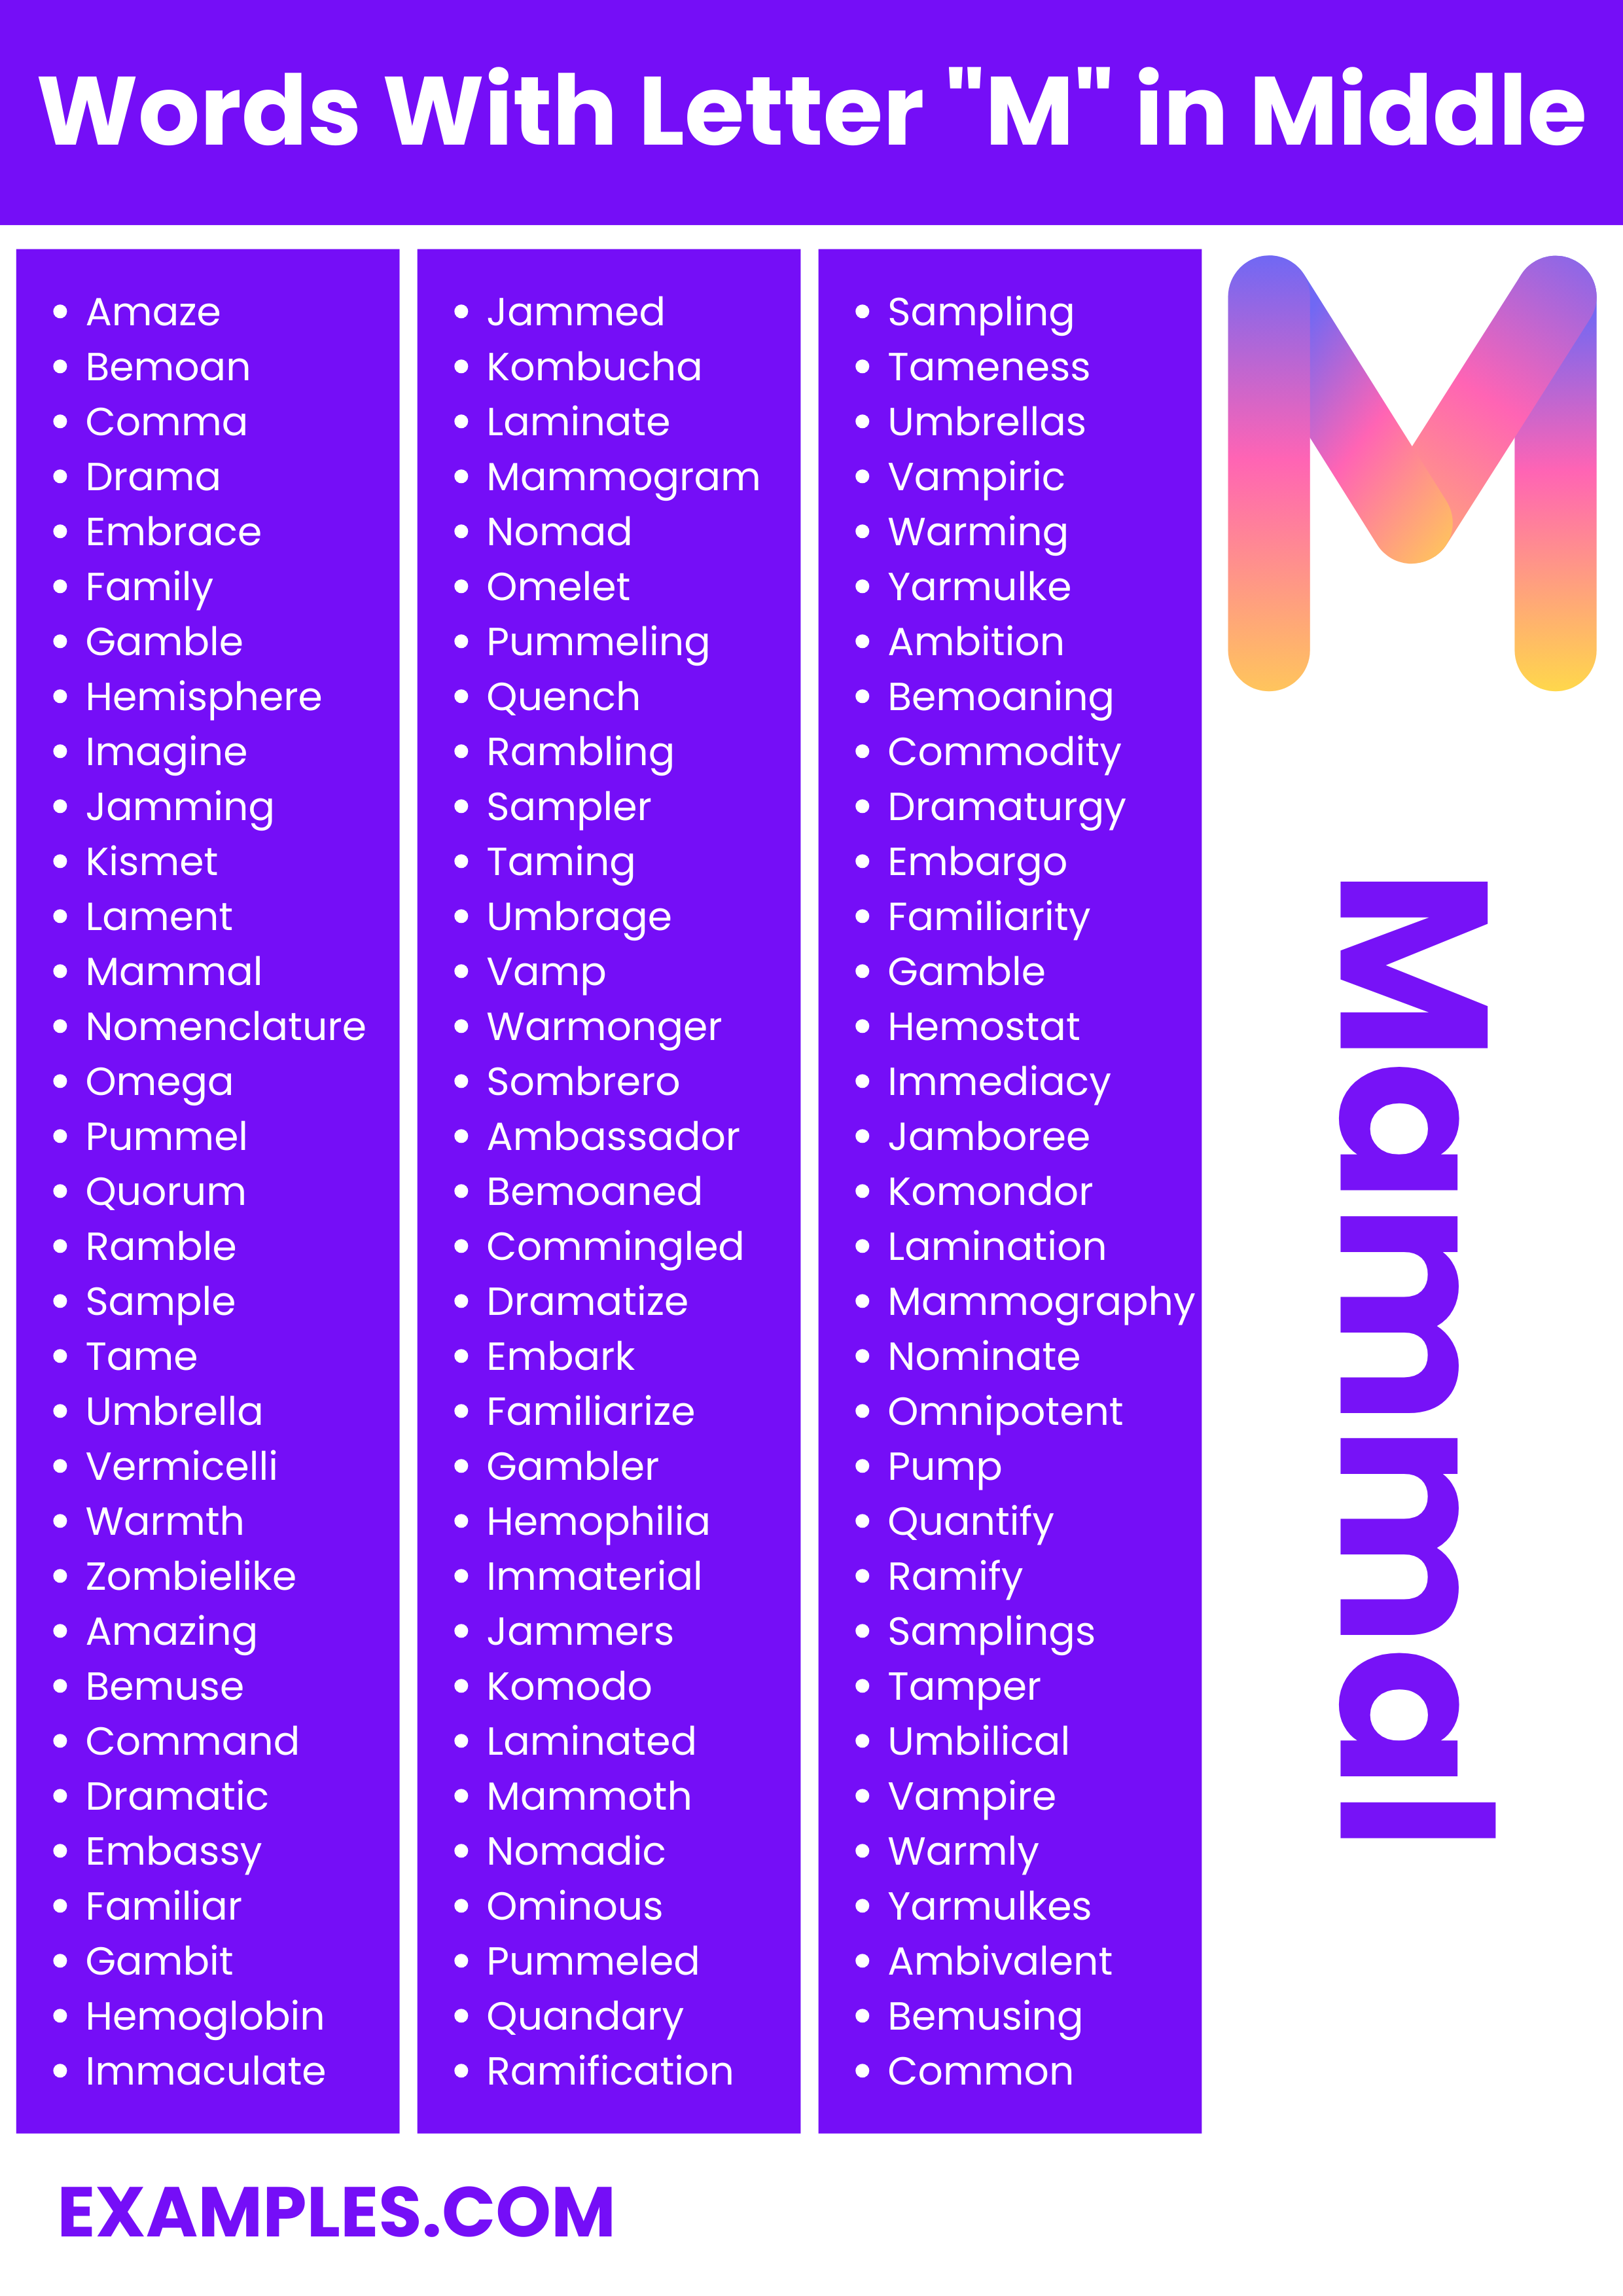 commonly used words with letter m in middle